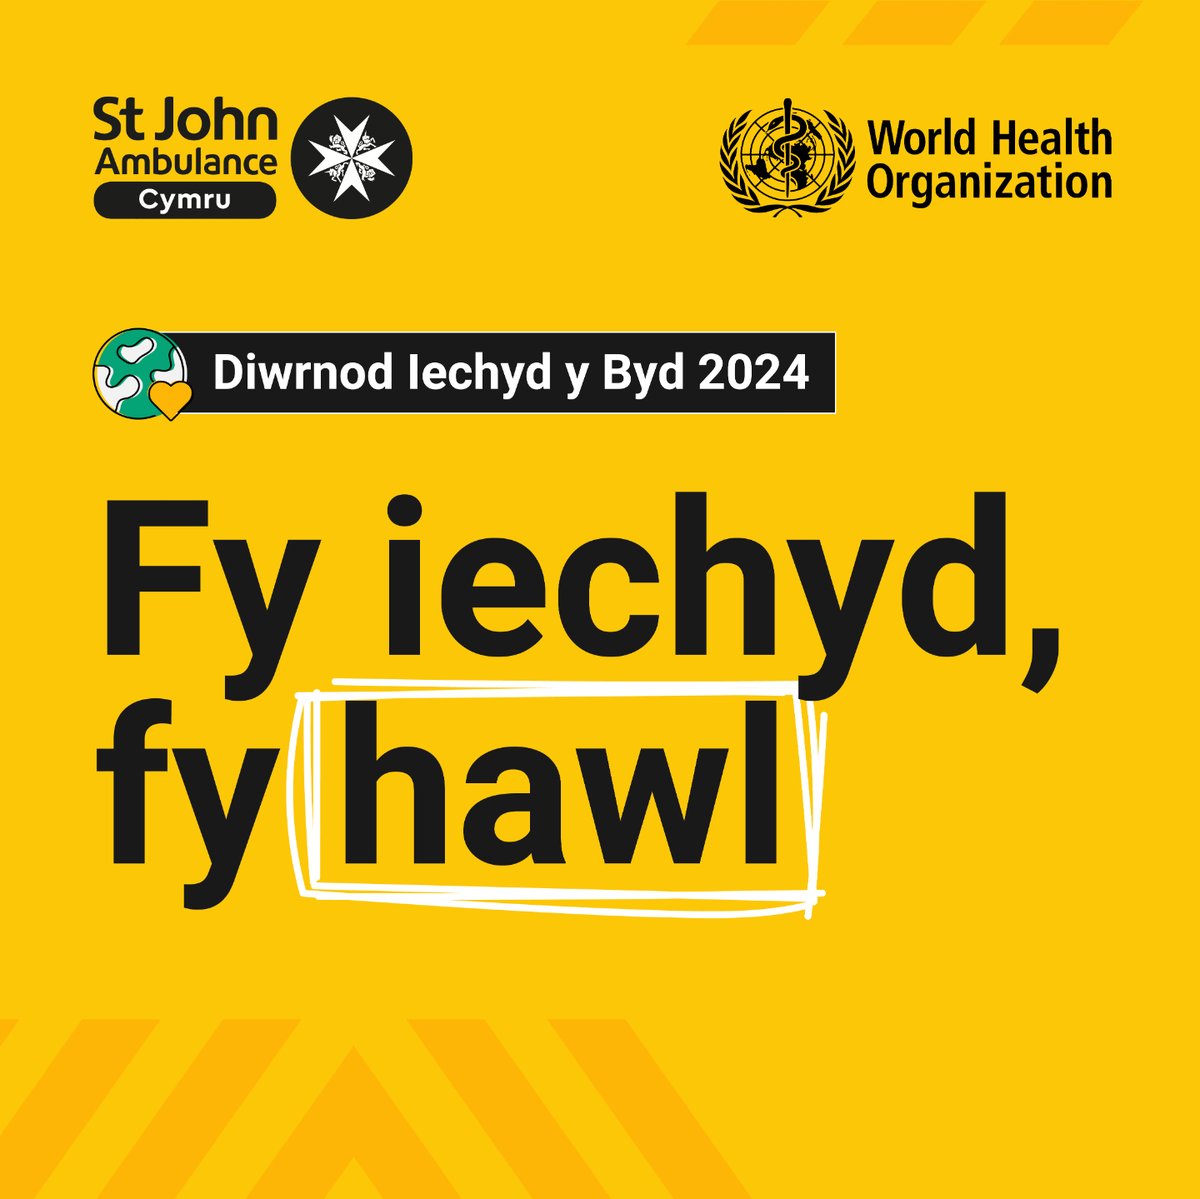 Today marks World Health Day 2024. 🌎 As the first aid charity for Wales, we're working hard to improve the health and wellbeing in communities across the country through lifesaving first aid treatment, training and transport. 🚑 #WorldHealthDay2024 #MyHealthMyRight